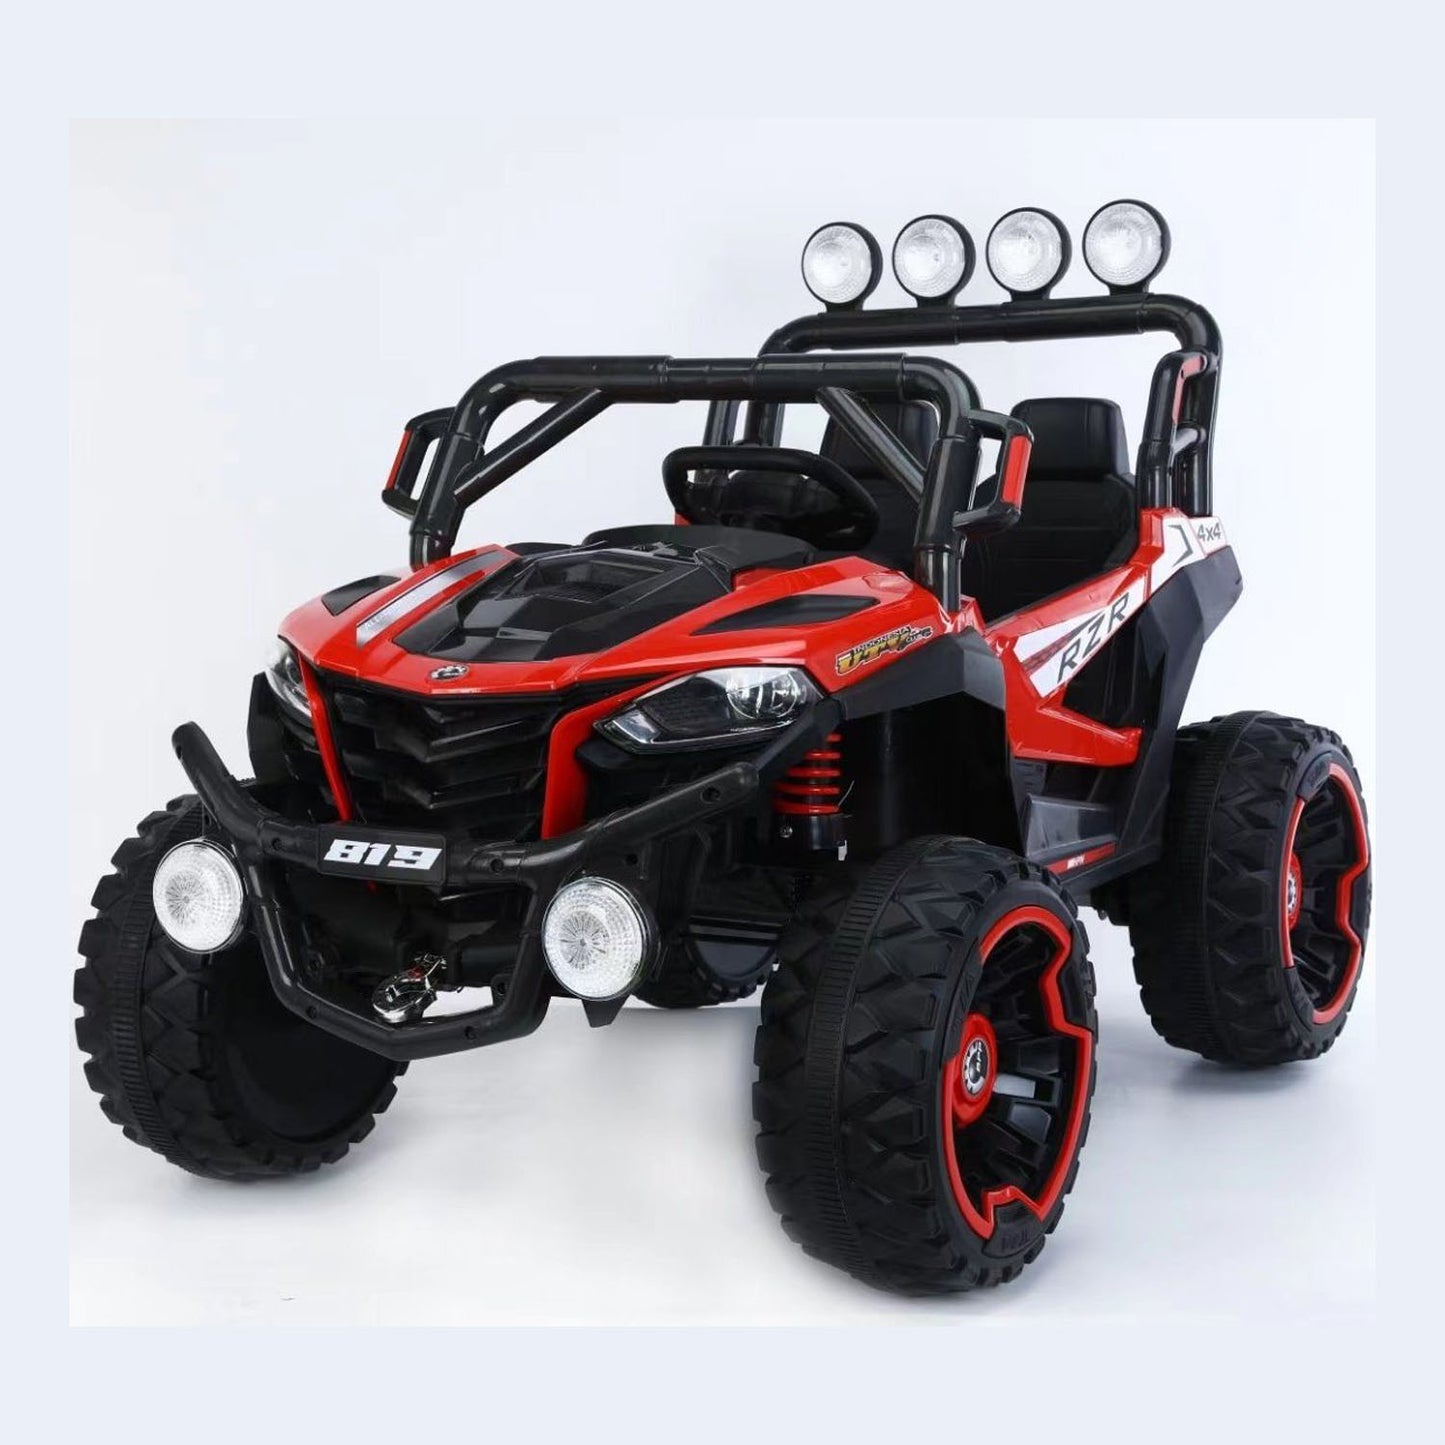 Fliptoy™ | 12V Ride on utv  | Baby driving Car toy | for girl’s & boy’s age group 3 -6 years old Model No. 819